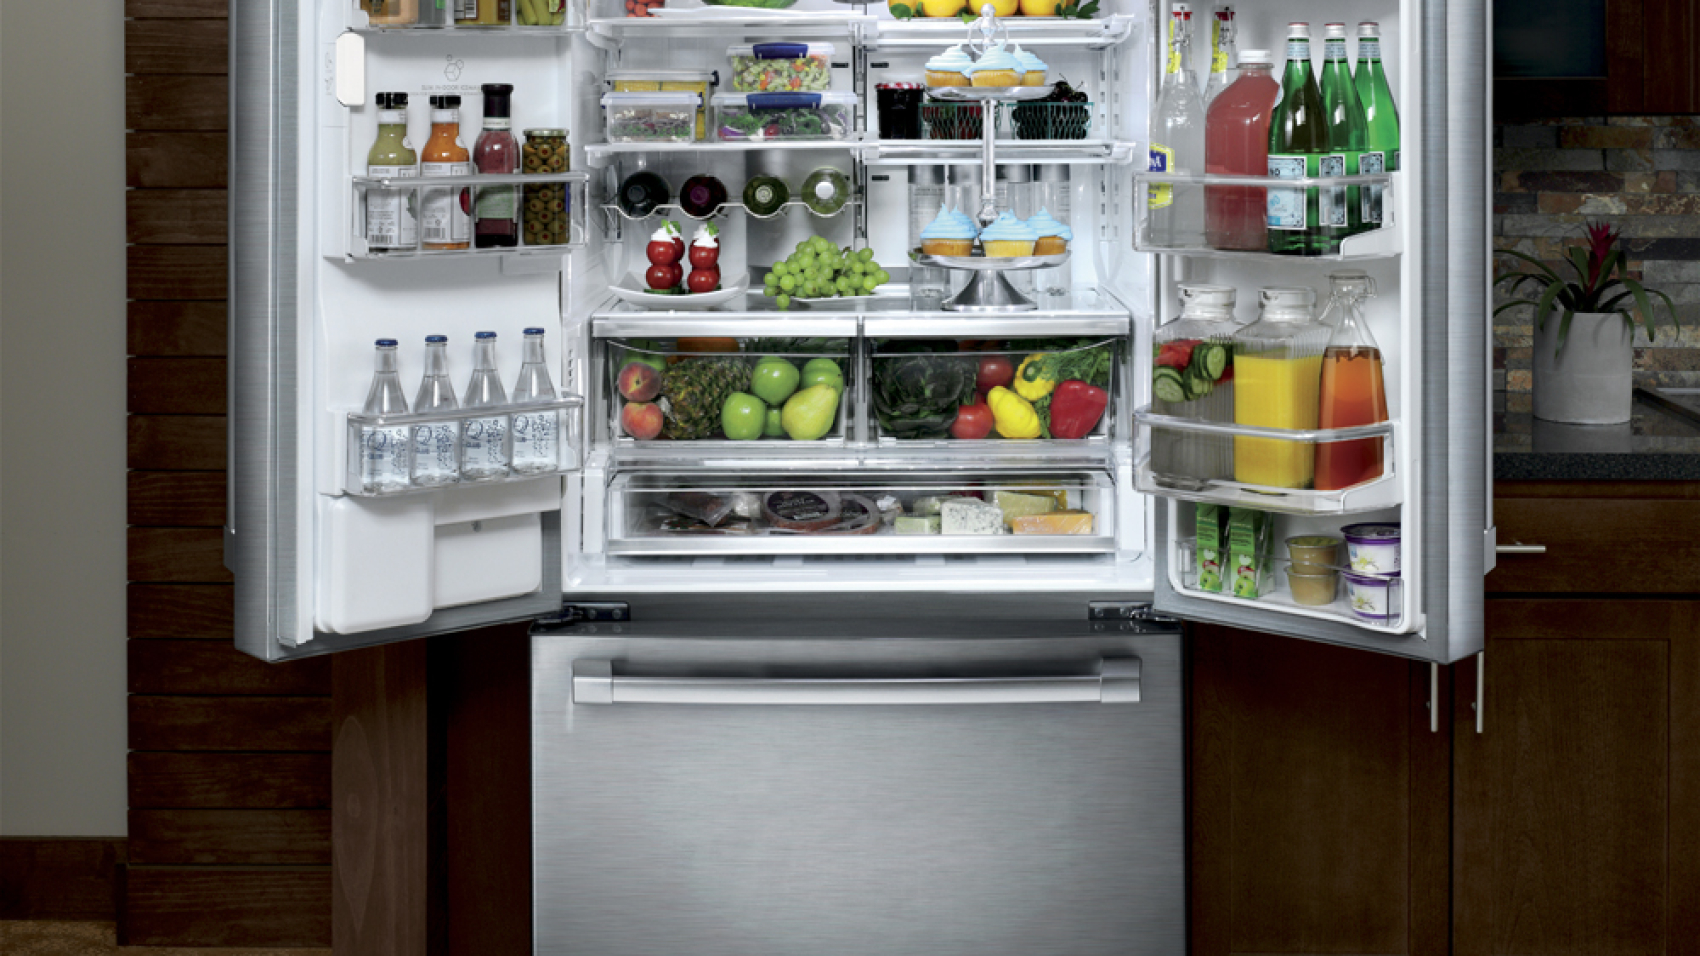 Tips and tricks to keep your refrigerator work smoothly and efficiently